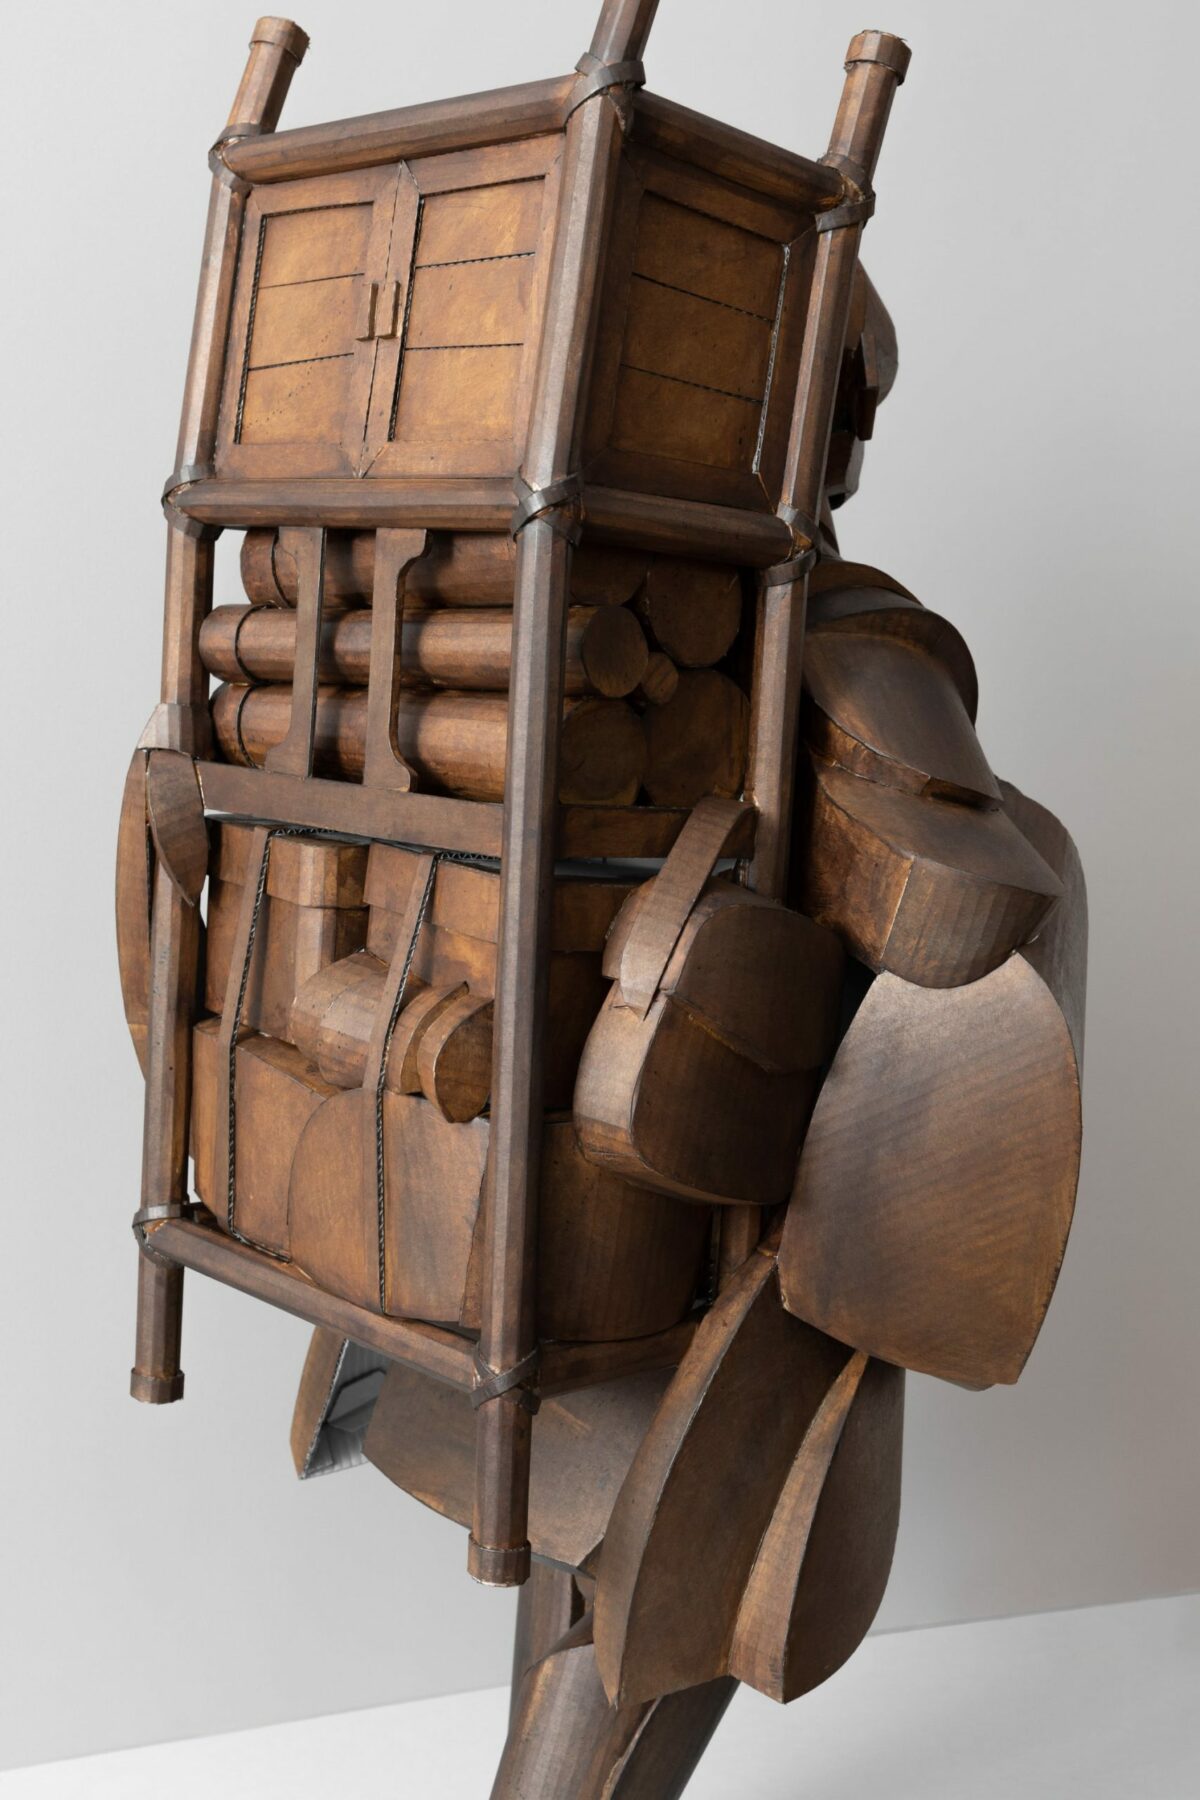 New Figurative Sculptures Made Of Cardboard By Warren King (7)